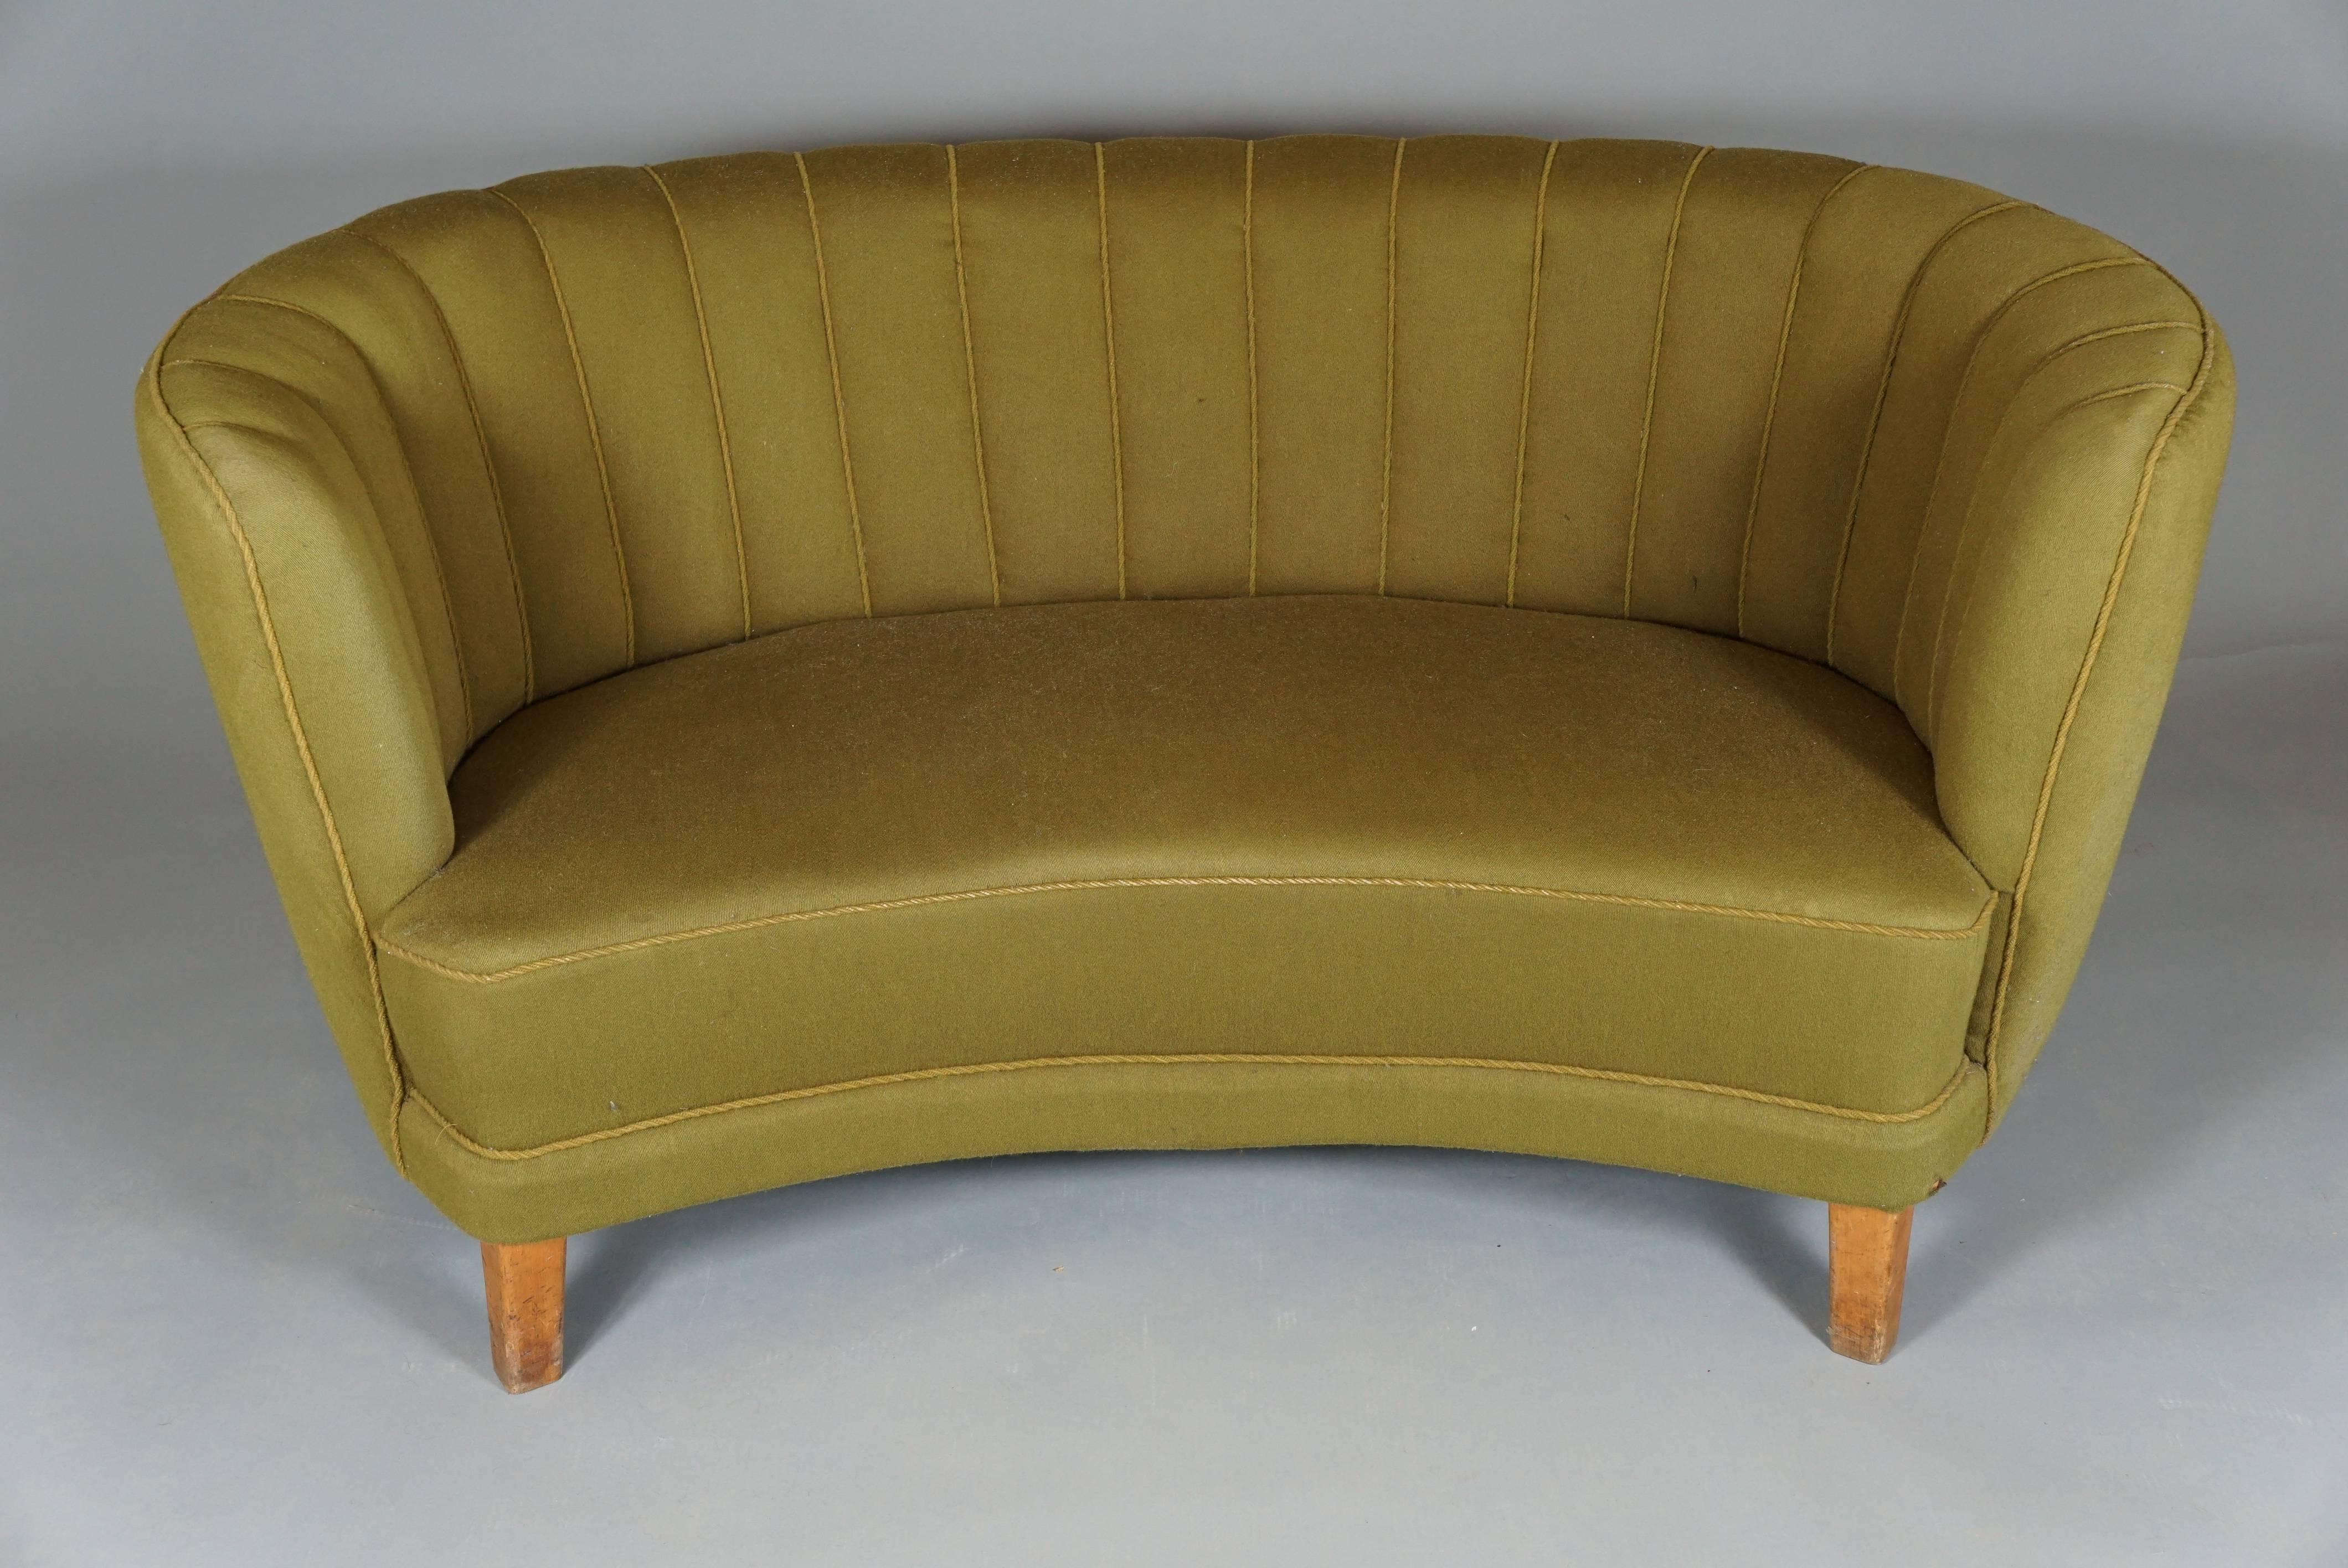 Danish Art Deco banana form sofa with channeled back upholstery and beech legs.